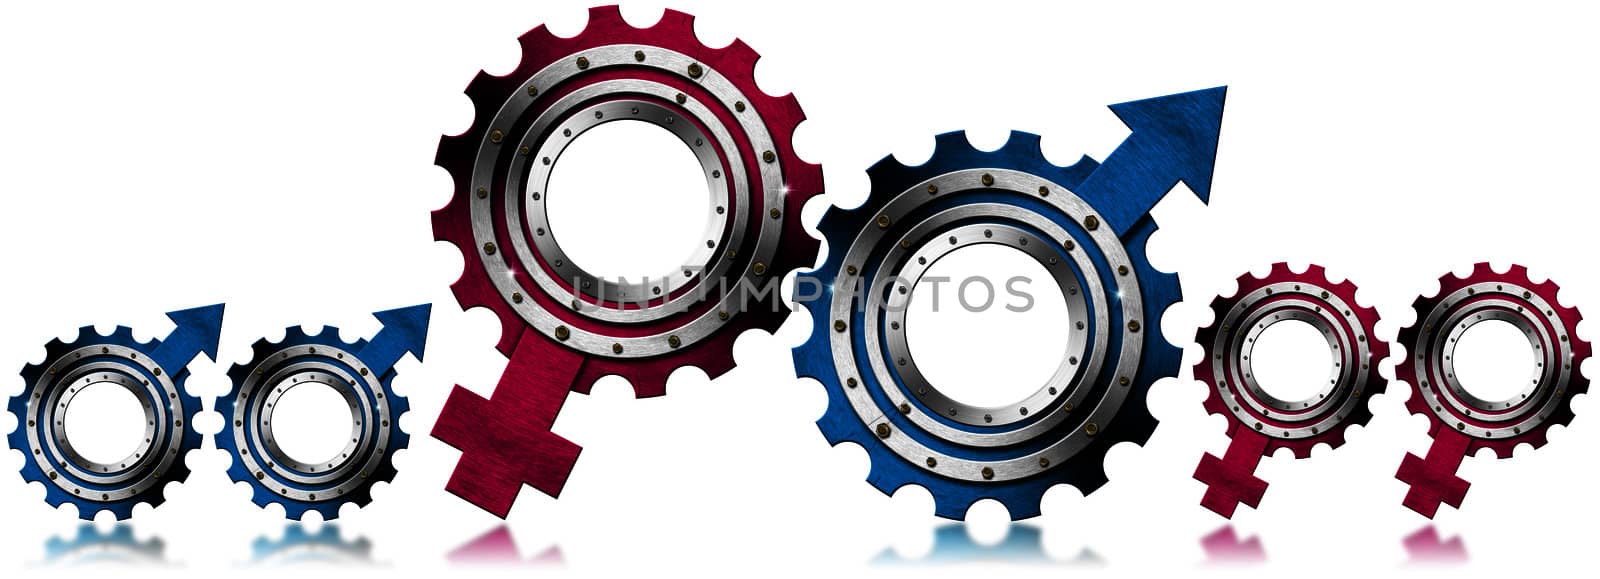 Symbol of family isolated on white background - shaped gears
